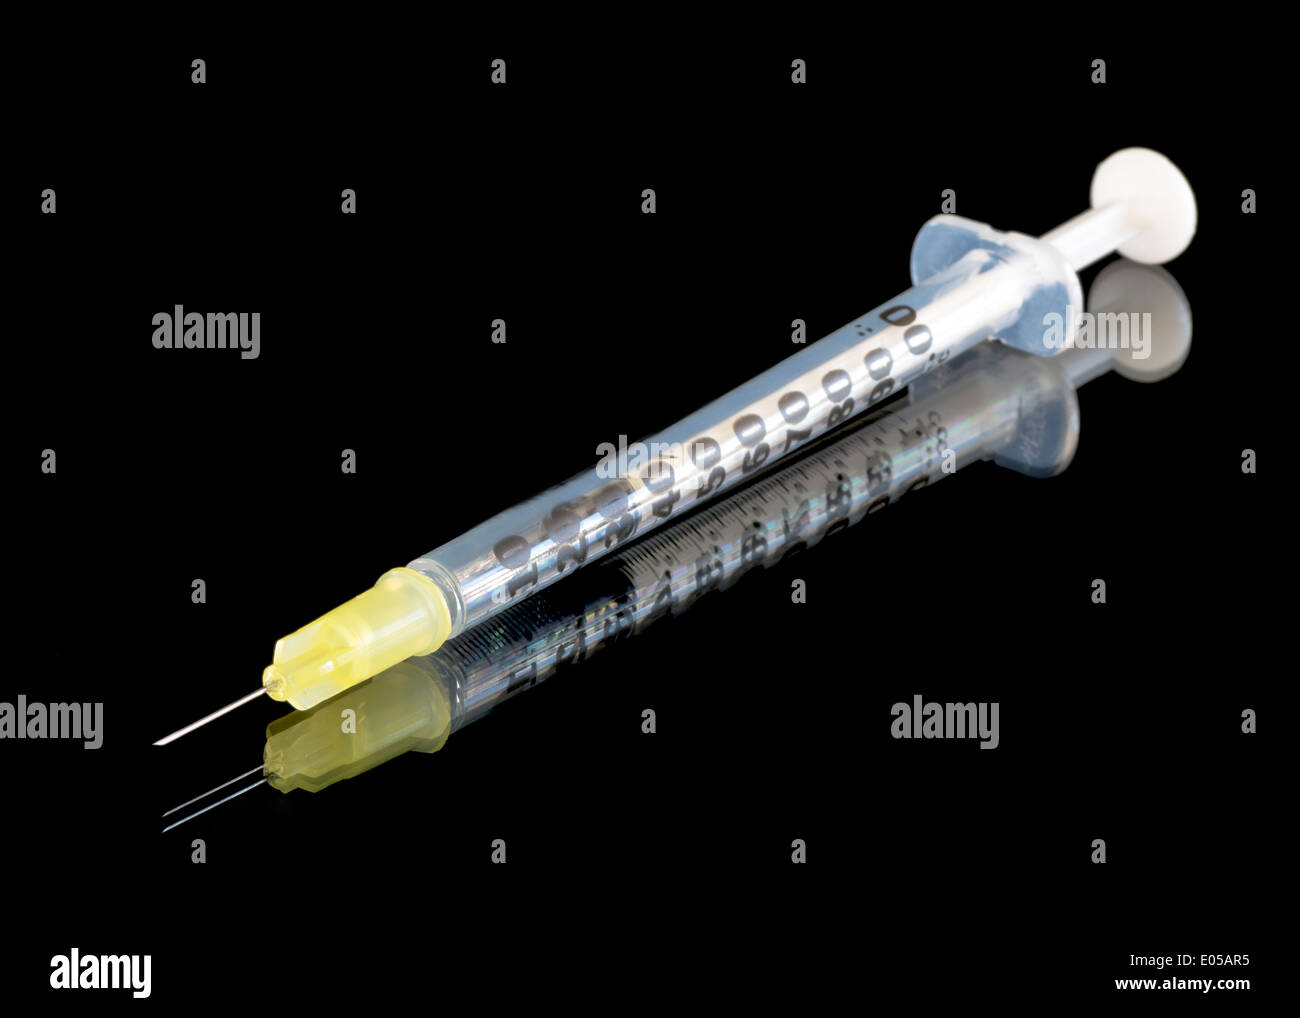 hypodermic needle from a medical kit Stock Photo